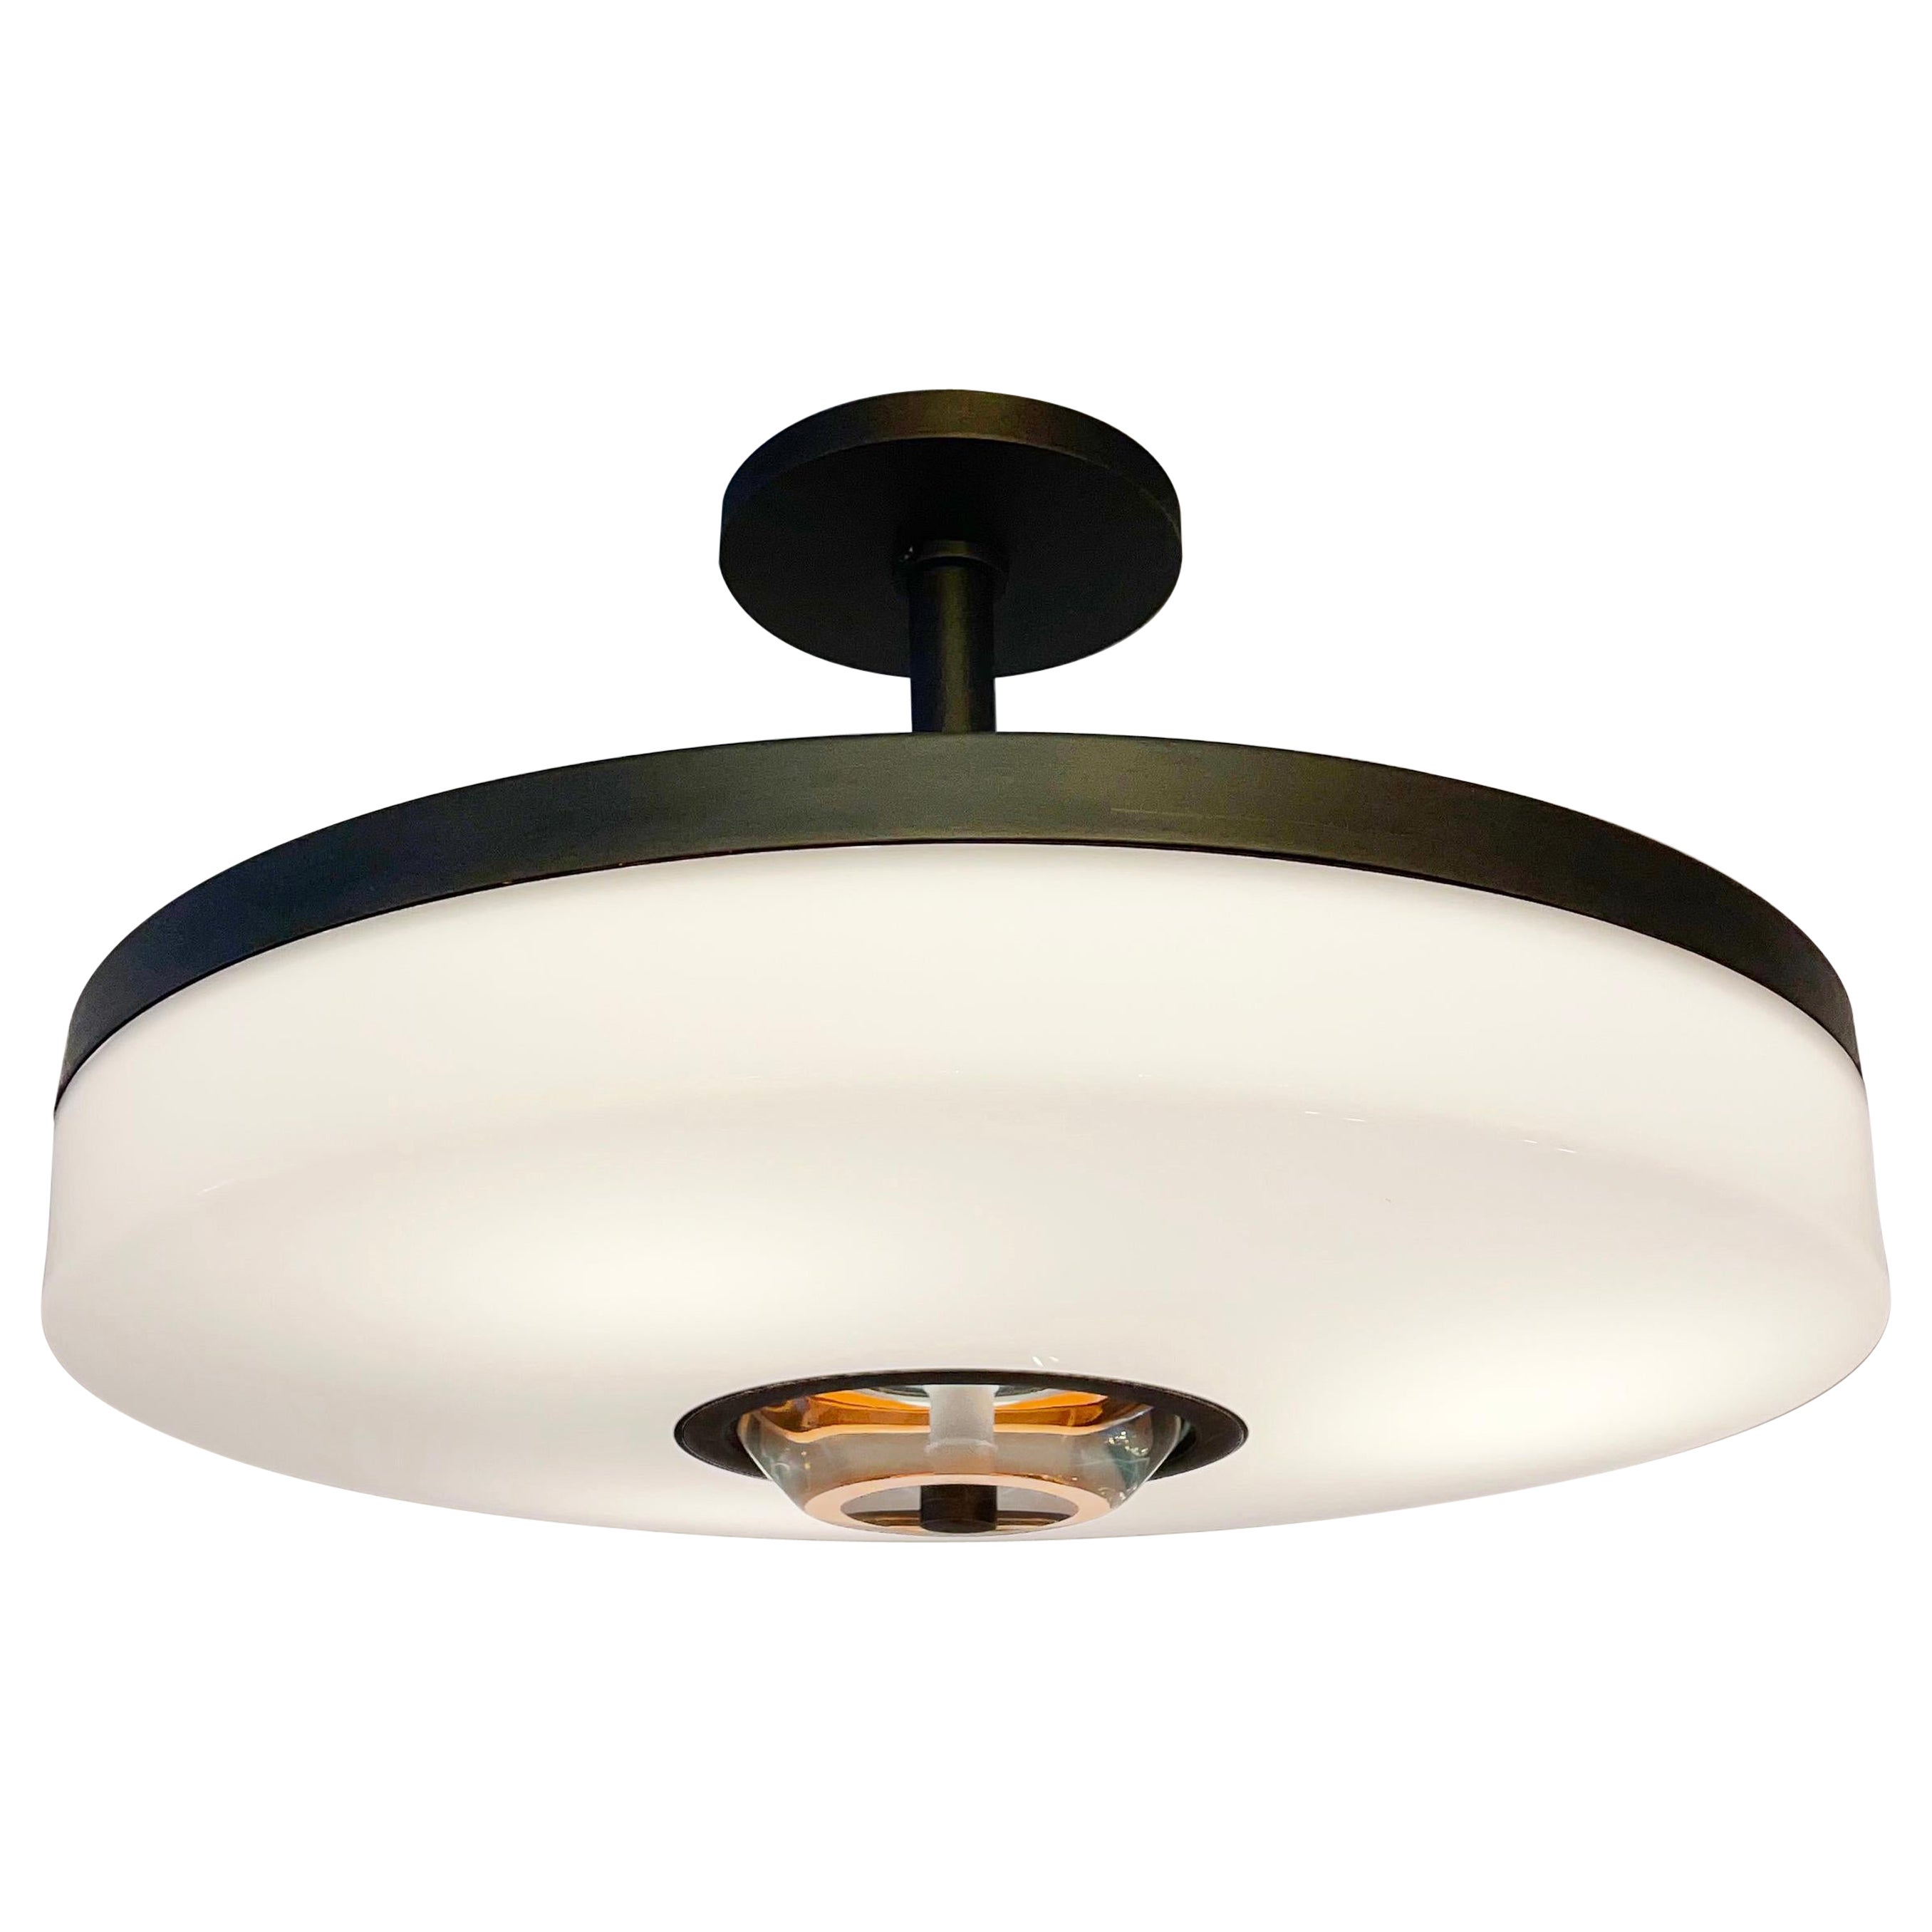 Iris Piccolo Ceiling Light by Gaspare Asaro-Rose Glass Version